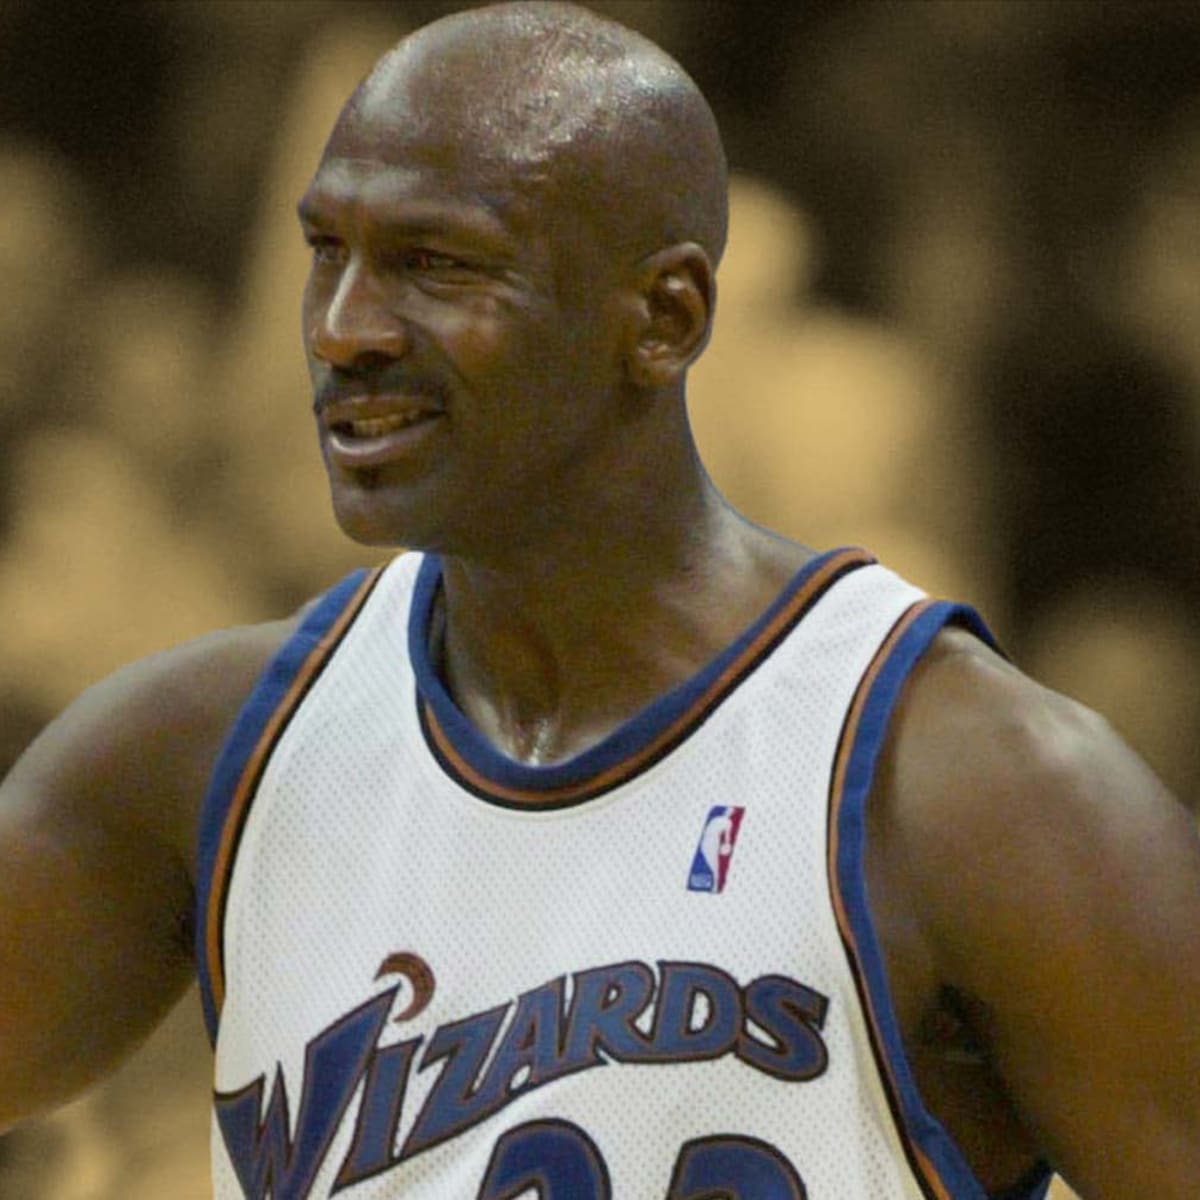 Michael Jordan's 10 Greatest Games as a 40 Year Old